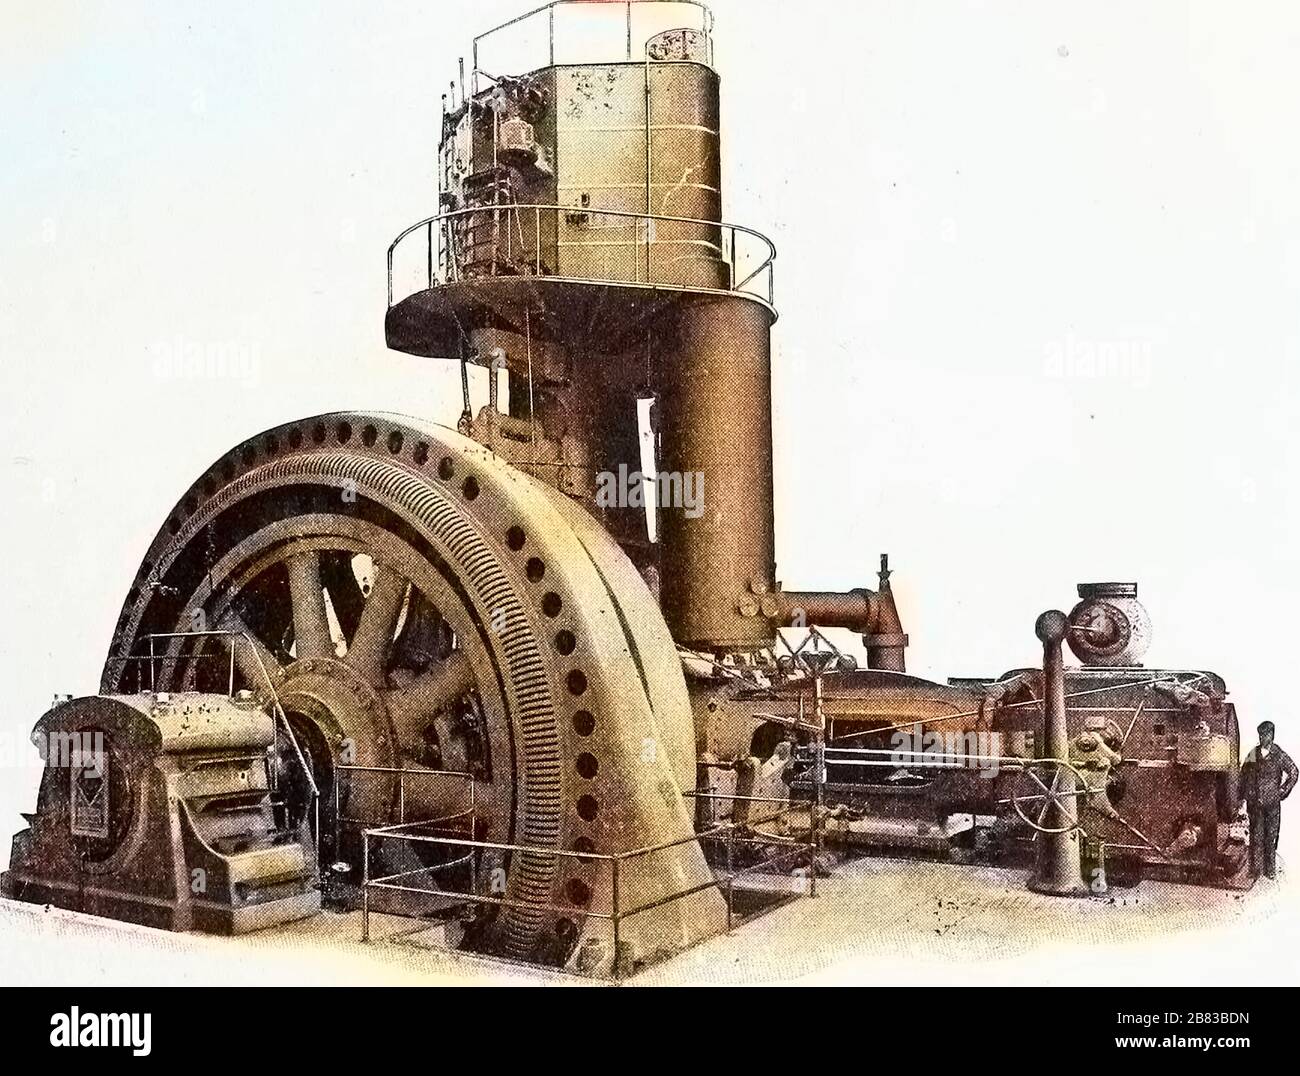 Engraving of the man standing beside the railway station turbine engine, from the 'Street railway journal', 1884. Courtesy Internet Archive. Note: Image has been digitally colorized using a modern process. Colors may not be period-accurate. () Stock Photo